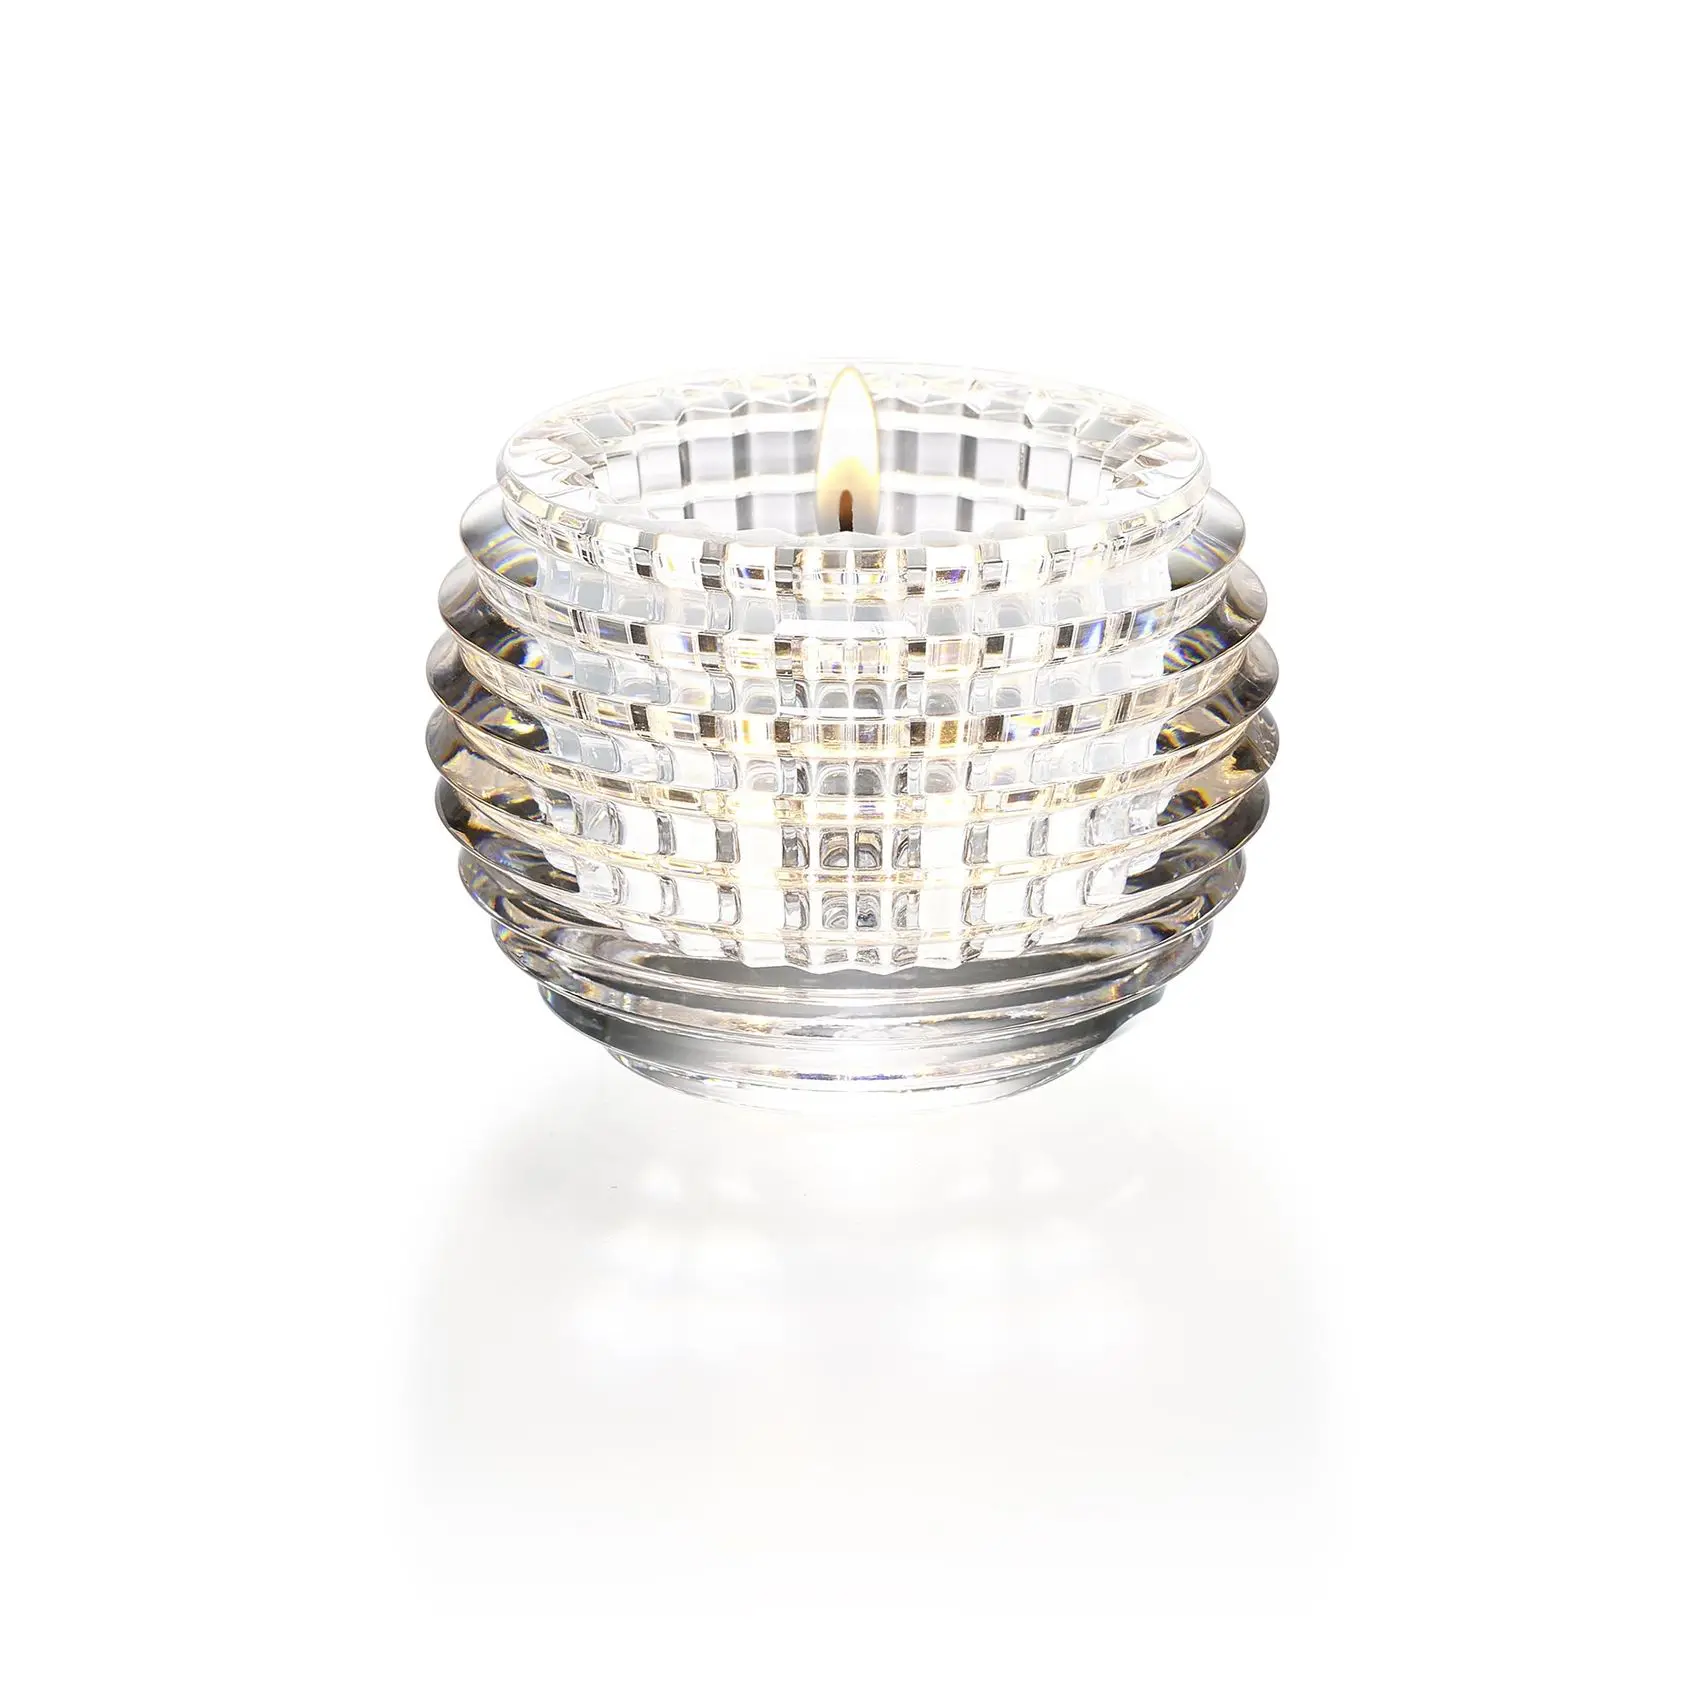 Baccarat Candeliere 2103850